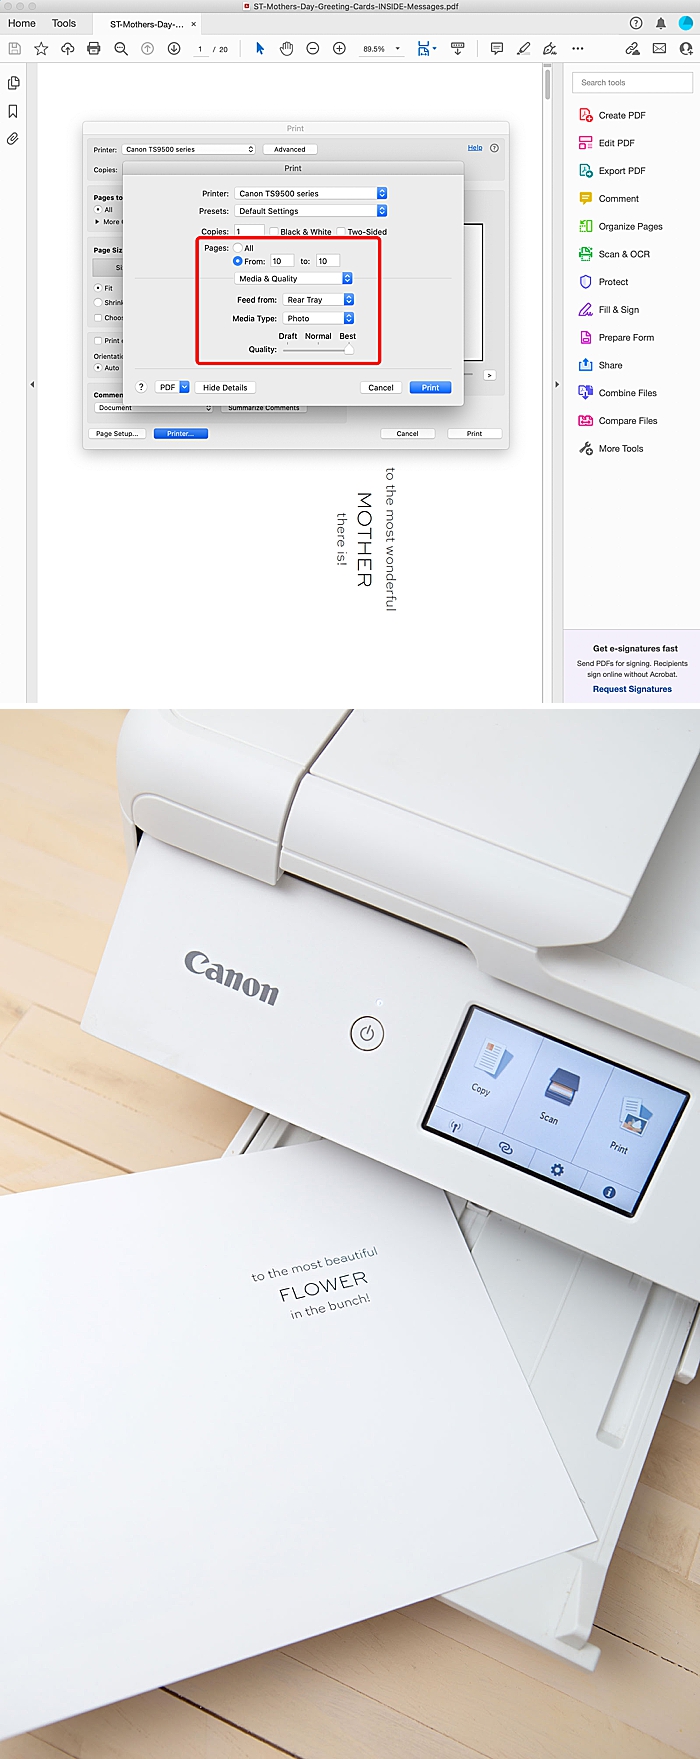 Print a mothers day card with Canon PIXMA